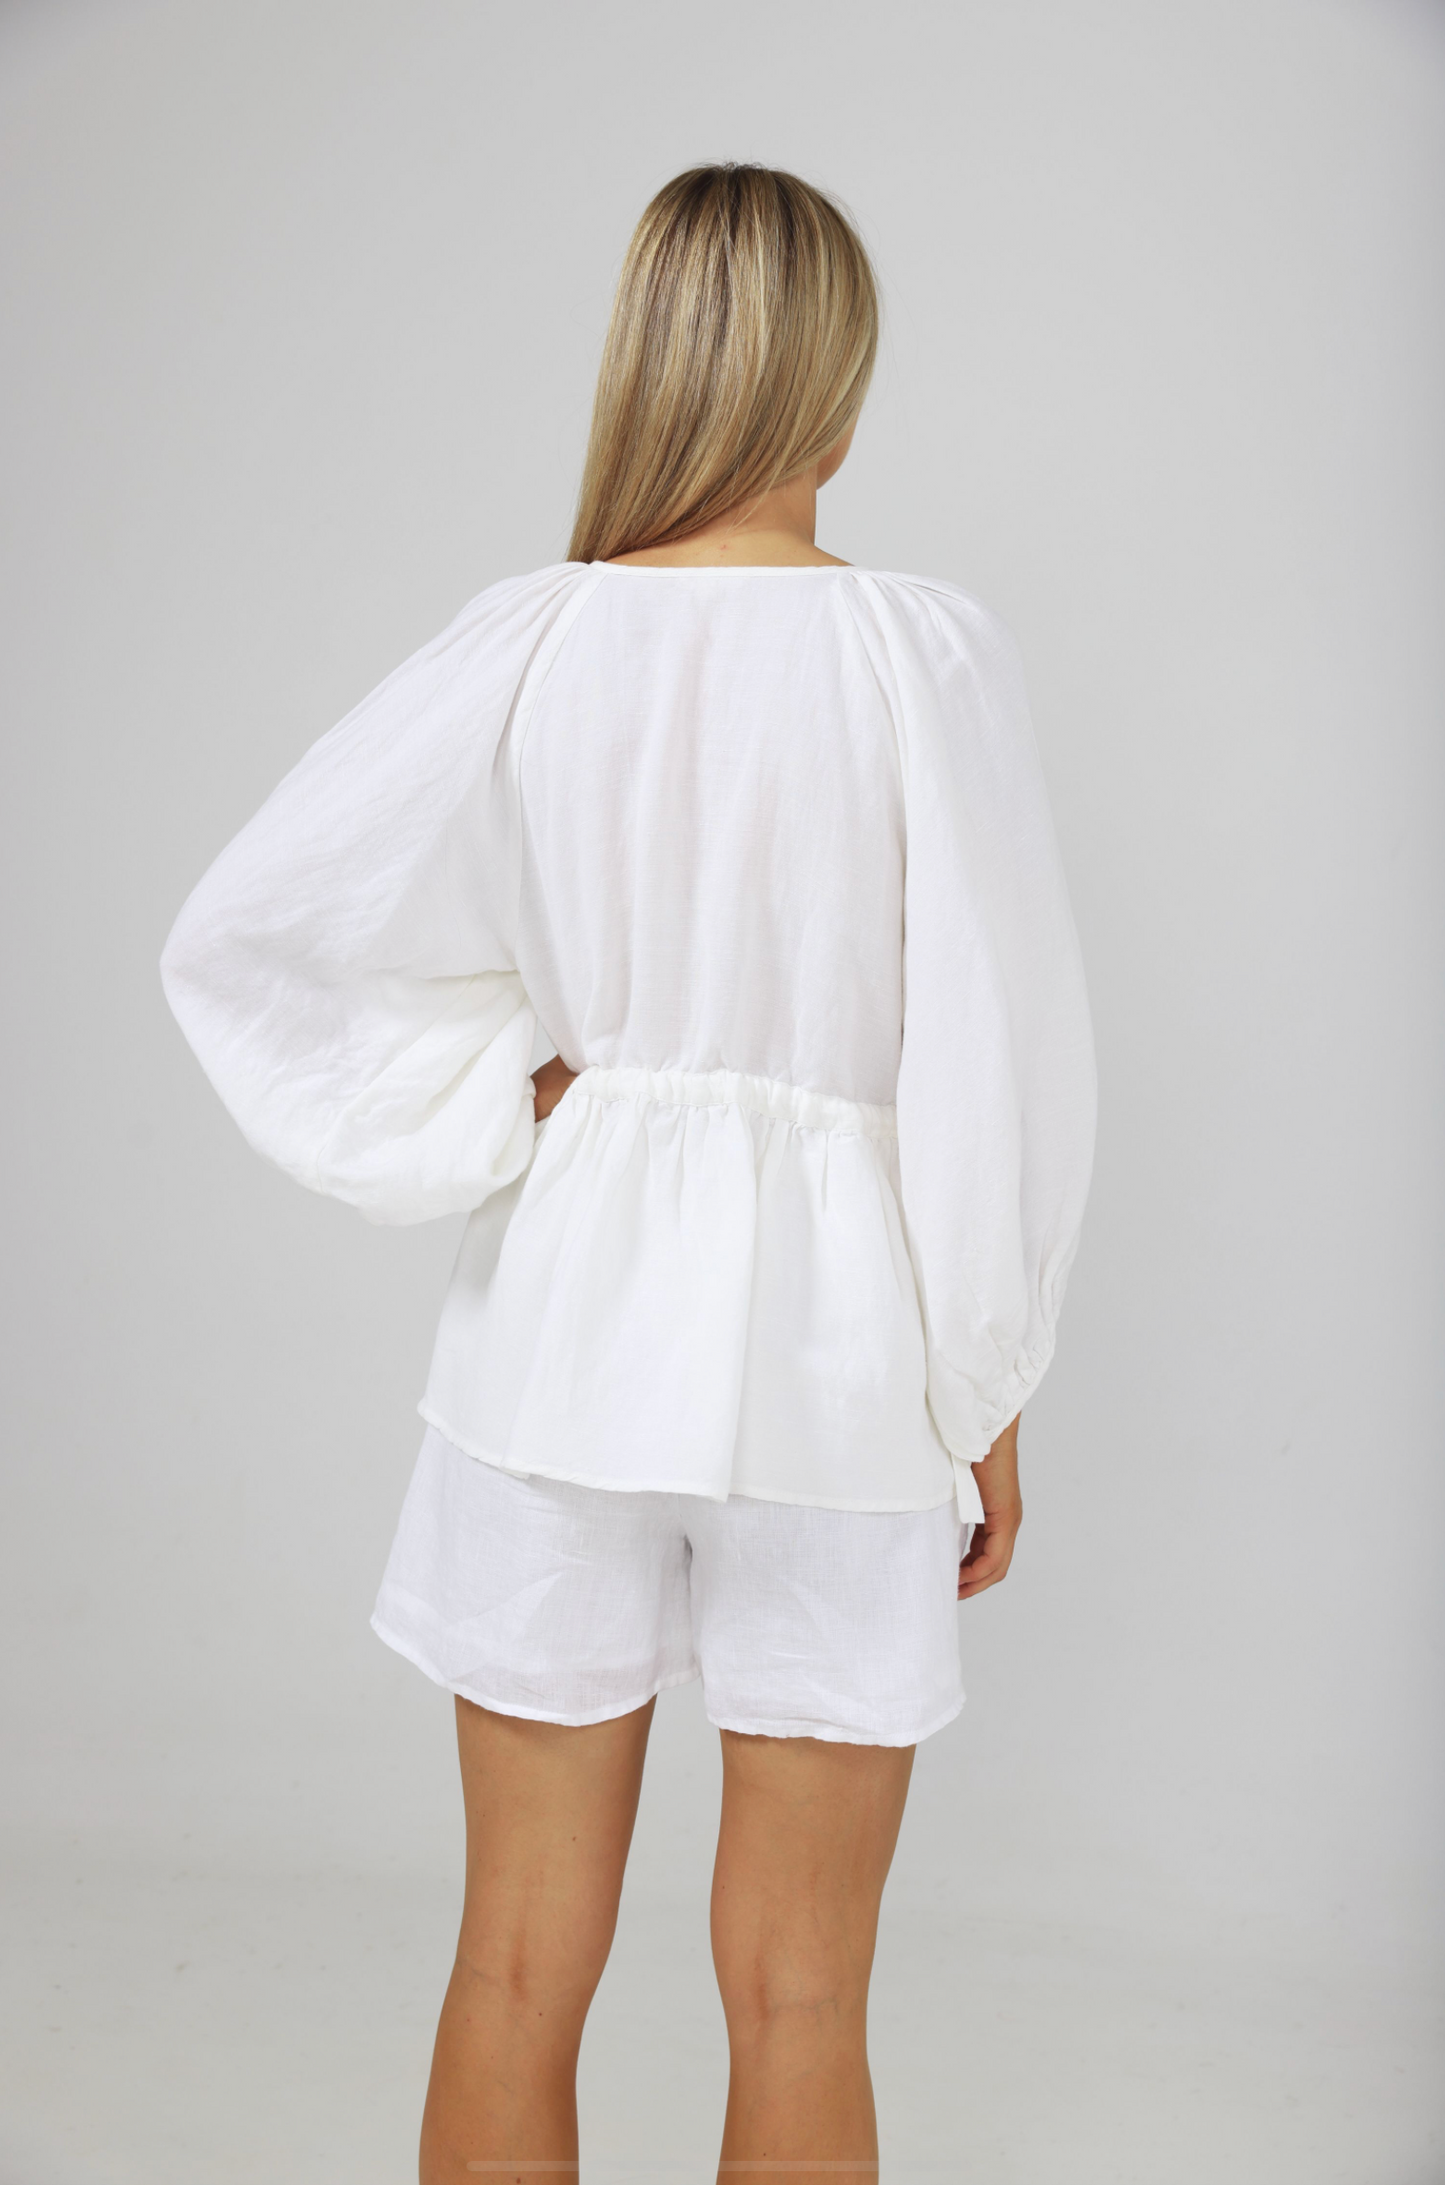 Shanty wing on a Prayer Top - White